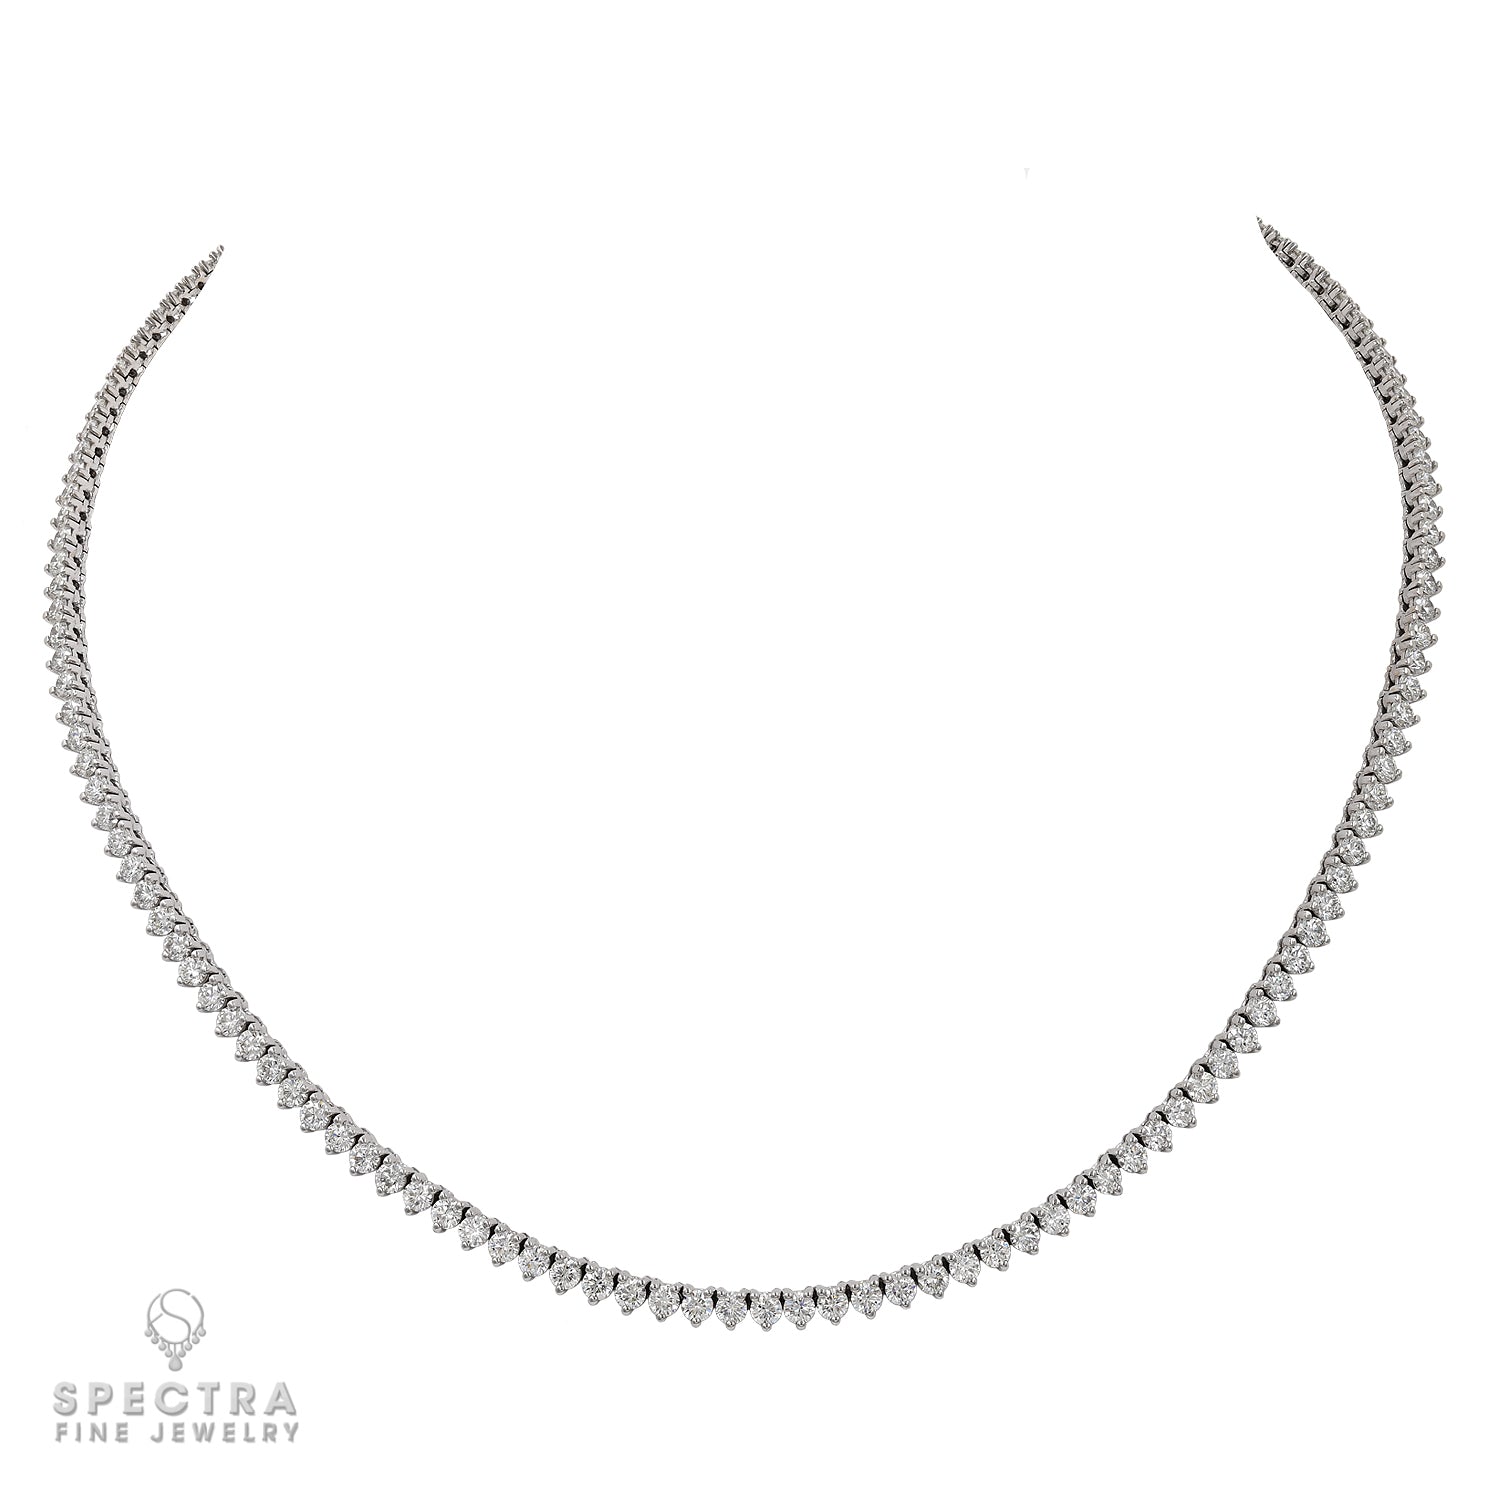 7.89cts Round Diamond Tennis Necklace in 18k White Gold.